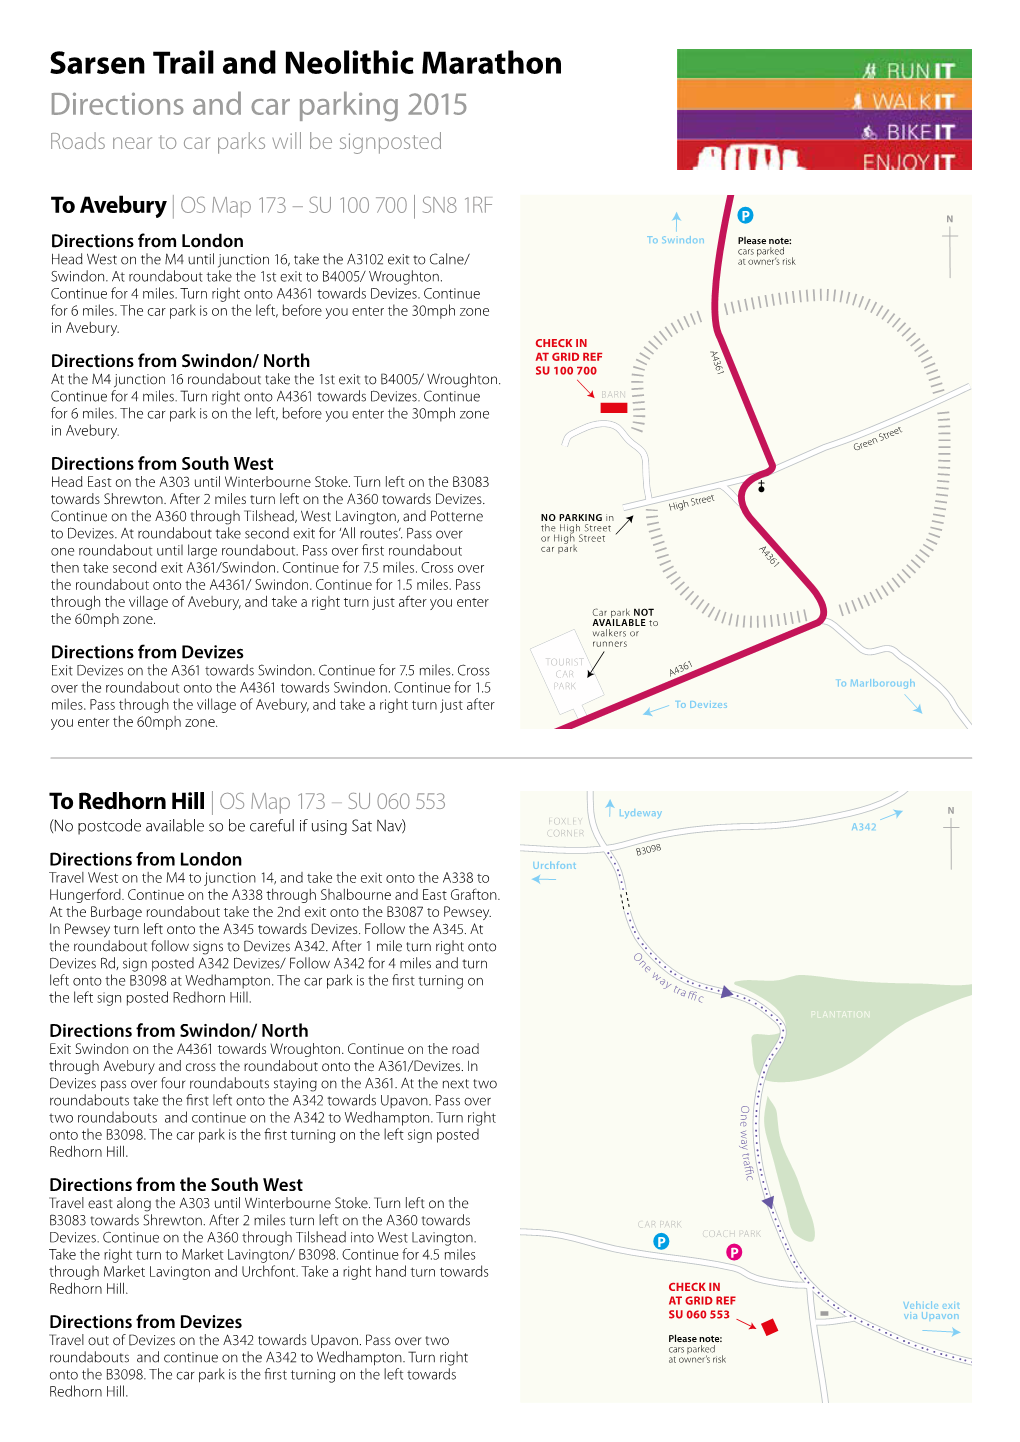 Sarsen Trail and Neolithic Marathon Directions and Car Parking 2015 Roads Near to Car Parks Will Be Signposted